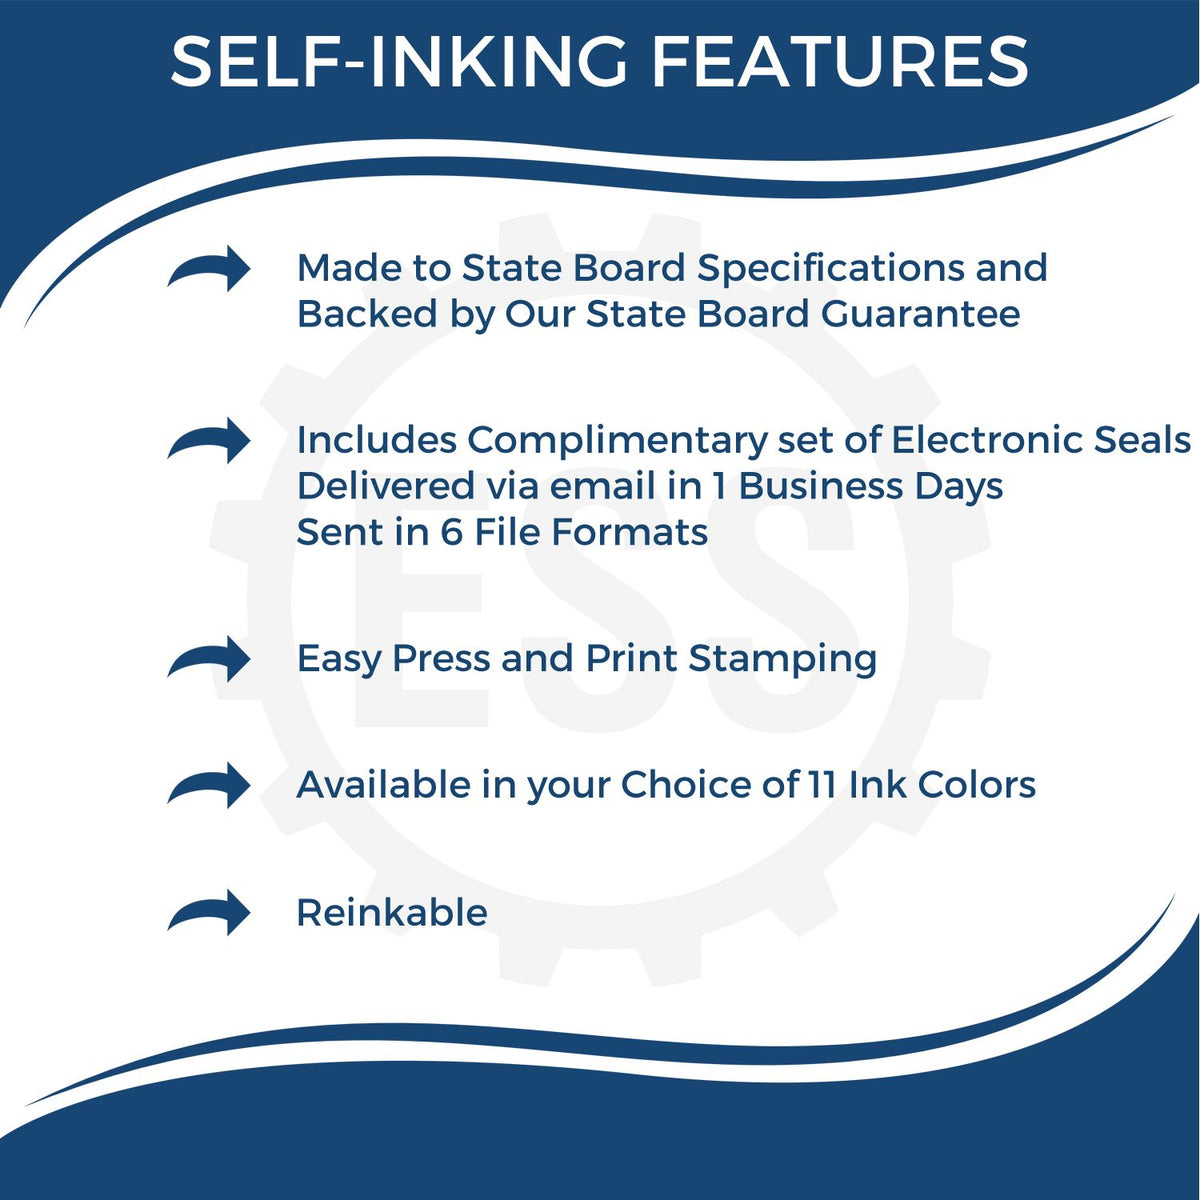 A picture of an infographic highlighting the selling points for the Self-Inking Nevada Geologist Stamp